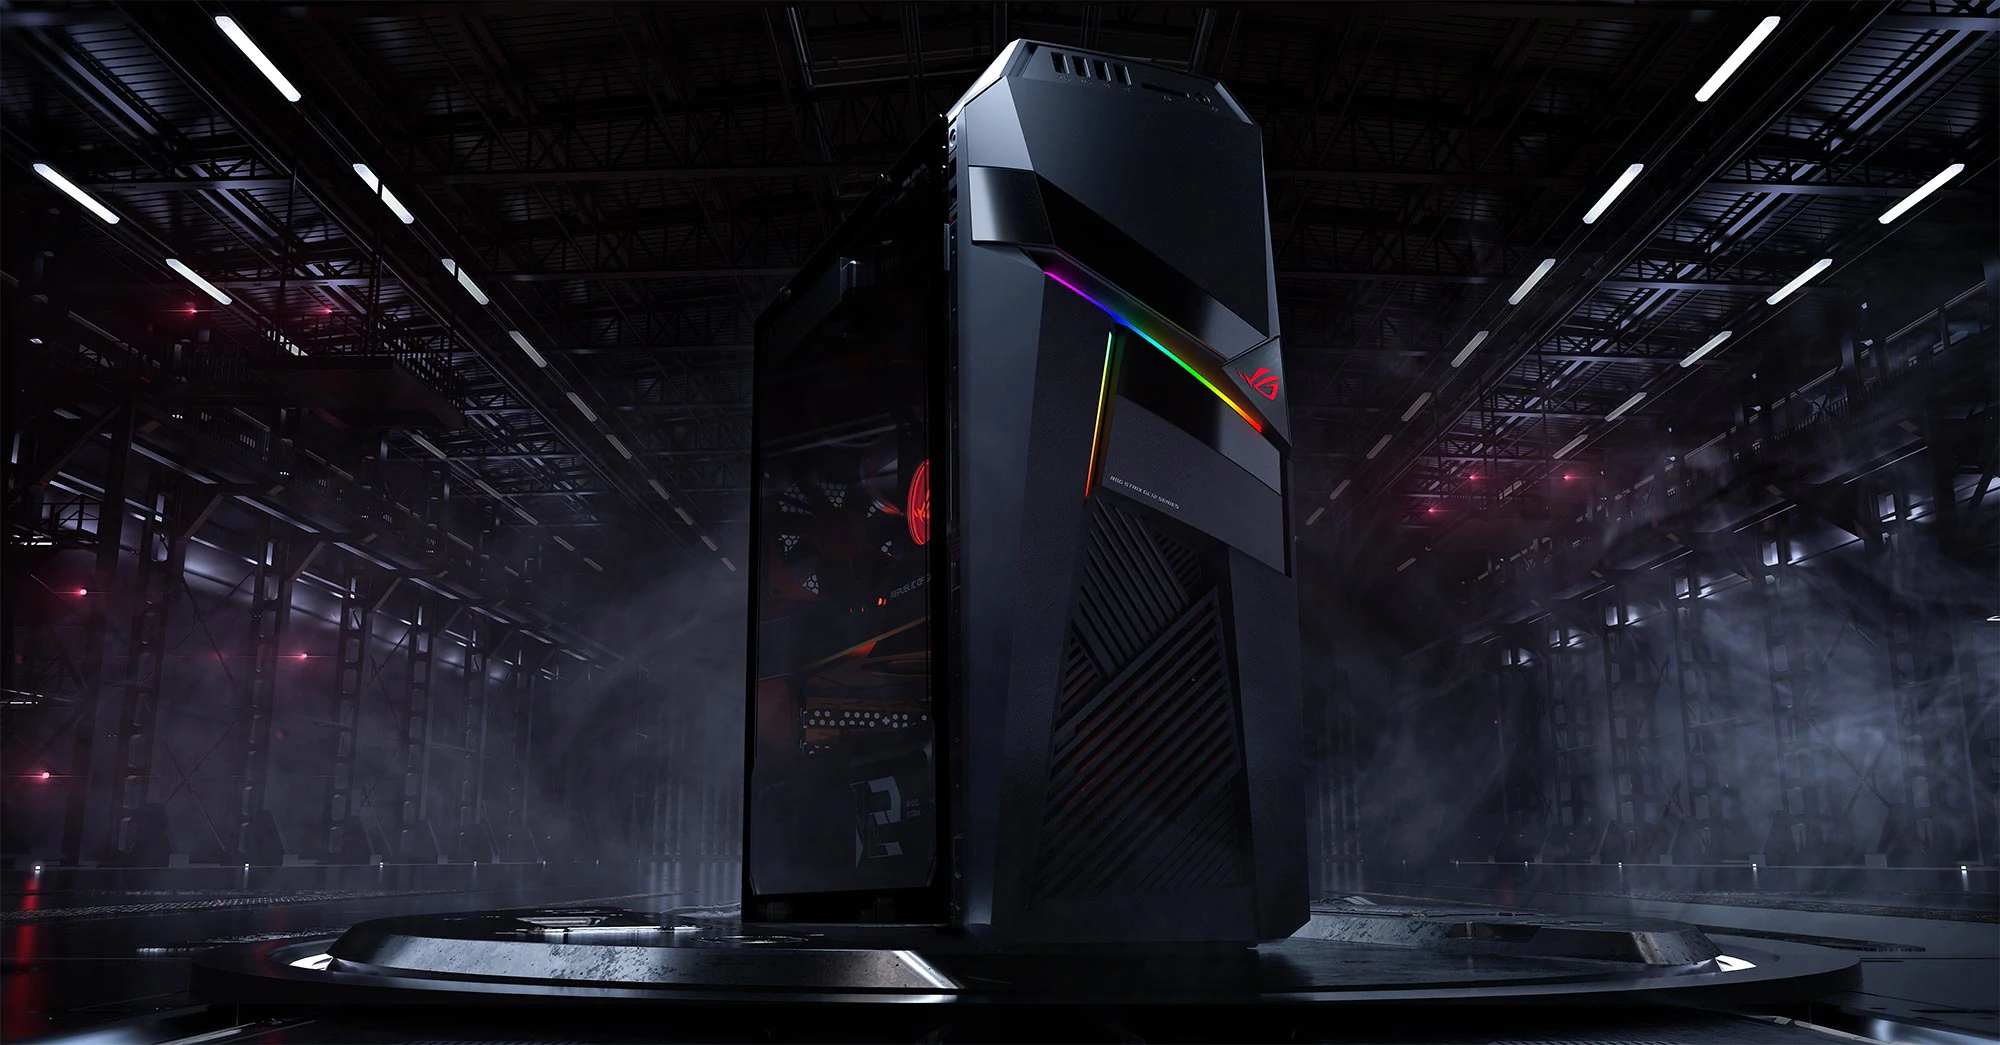 Asus introduces the ROG Strix GL12CX Desktop powered by the Intel Core i9-9900K NVIDIA GeForce RTX 2080 Ti News